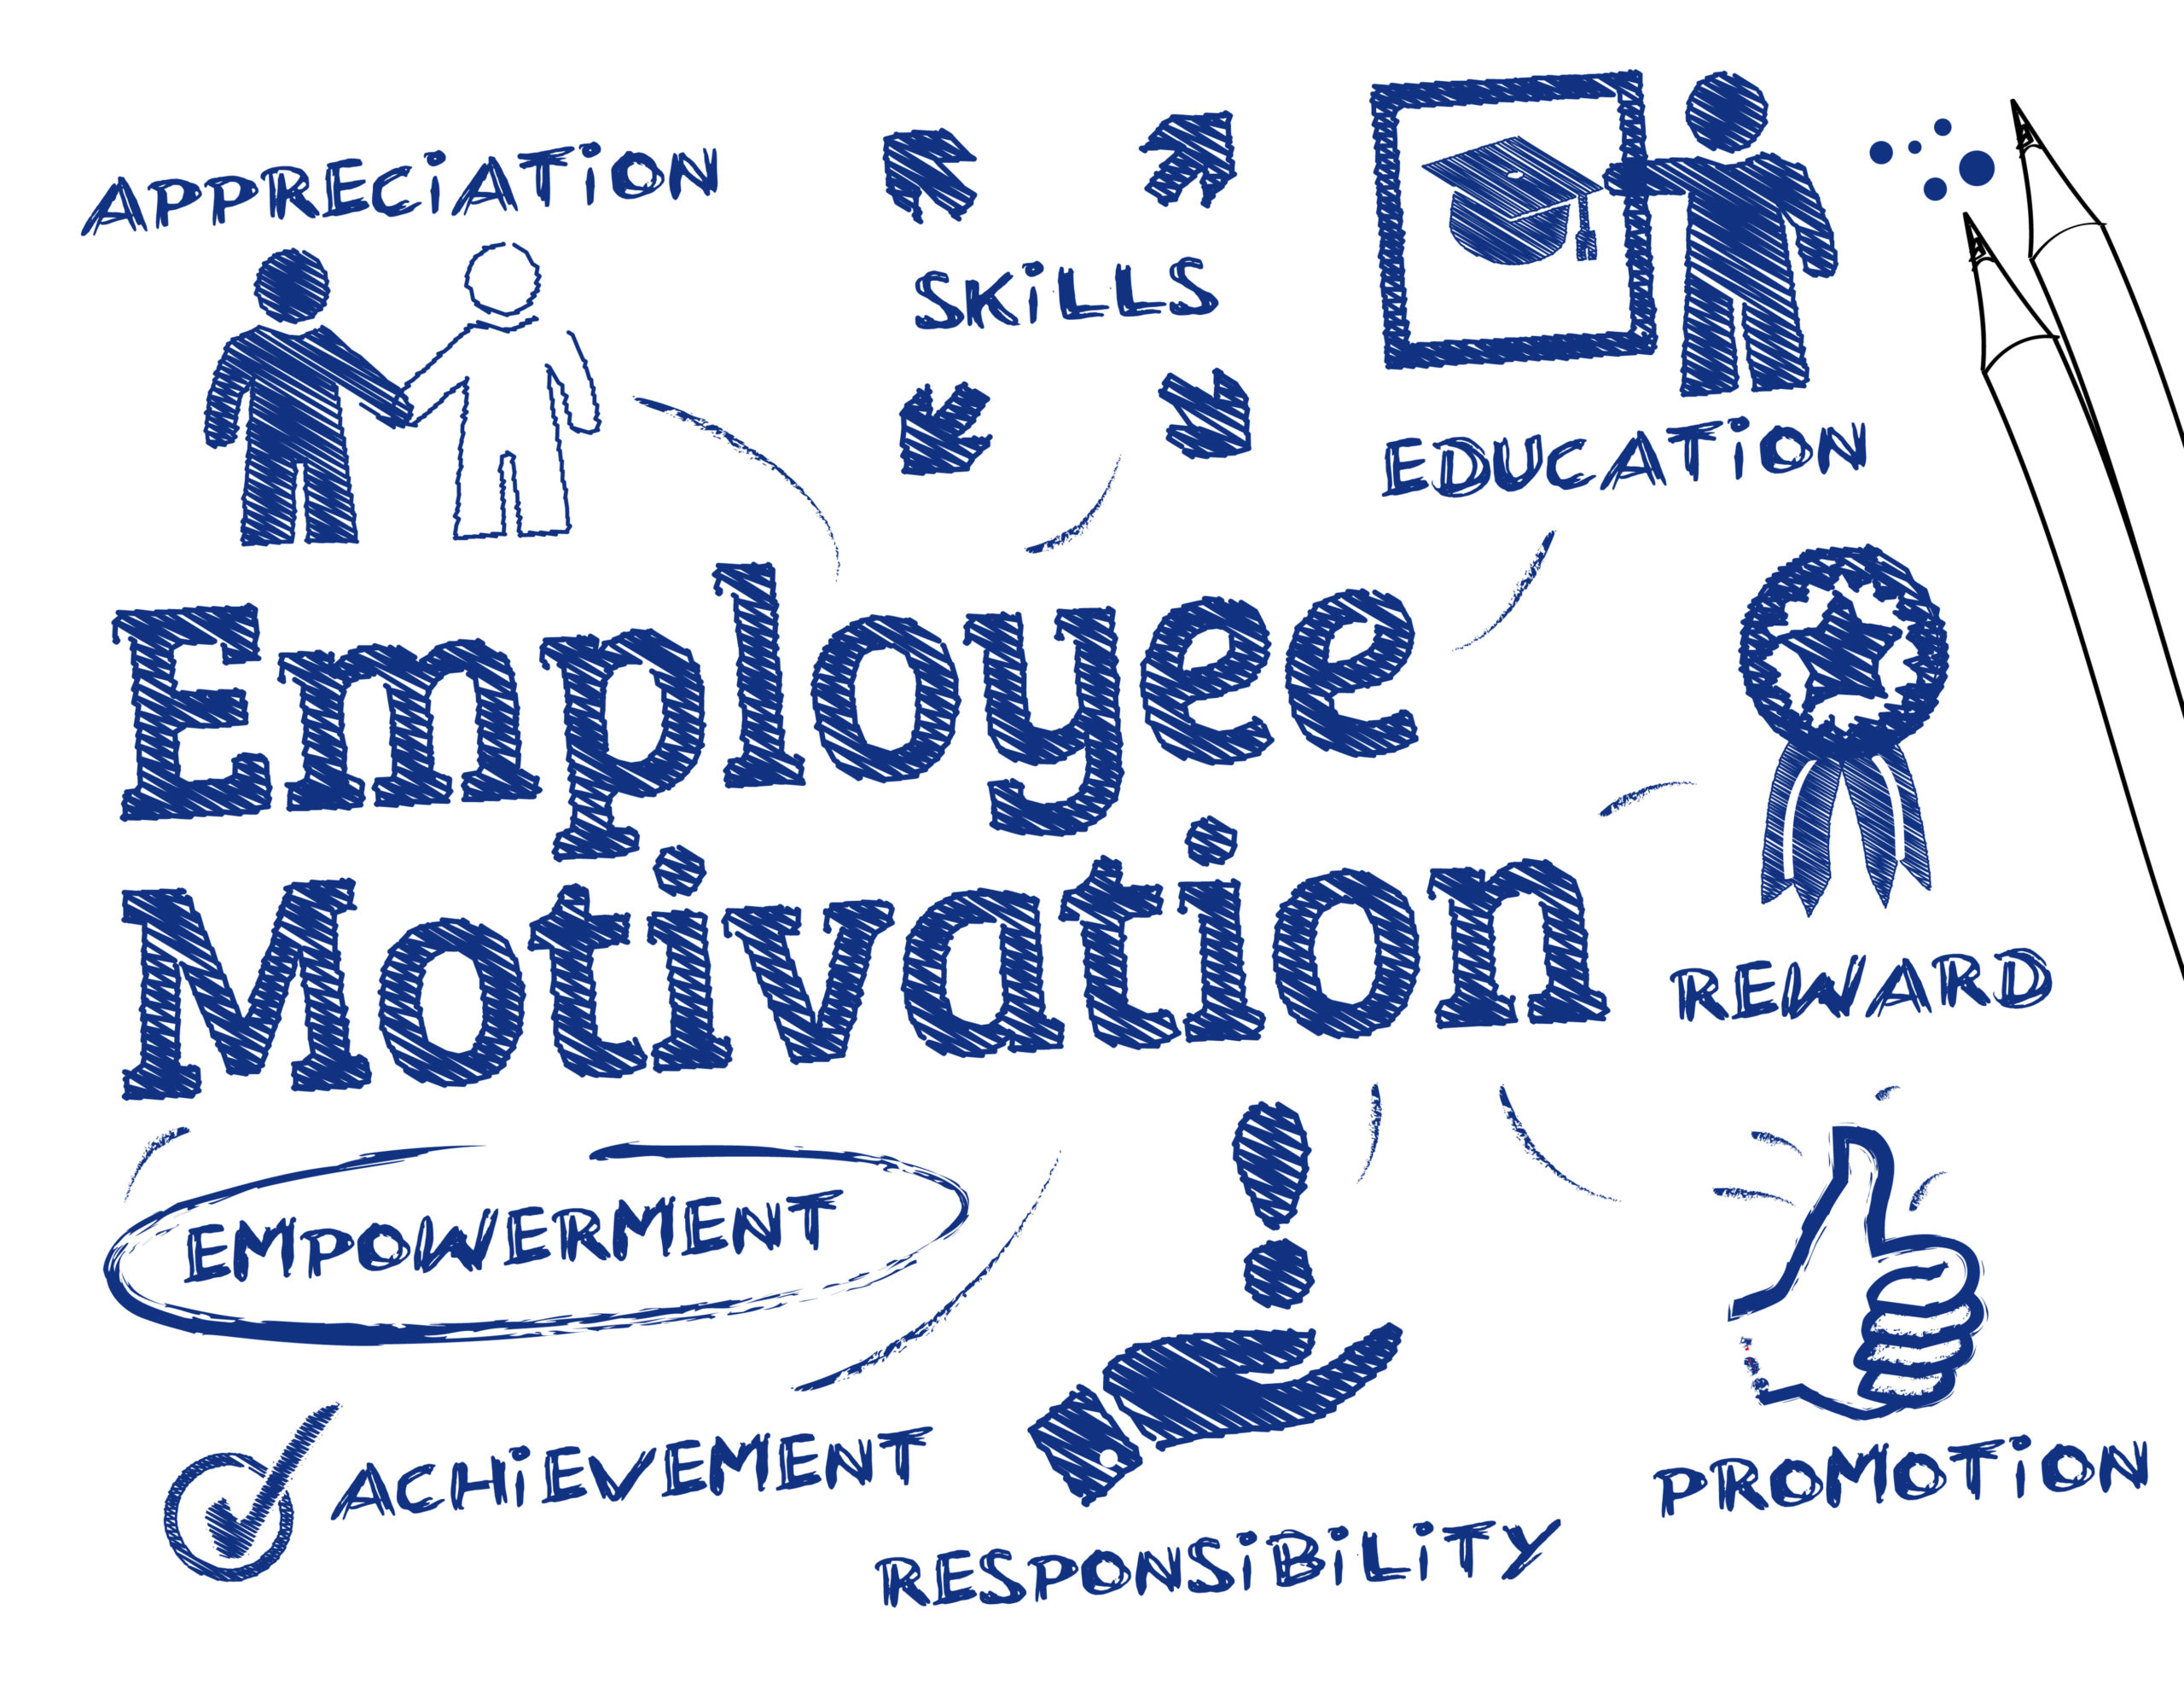 presentation on motivation in workplace